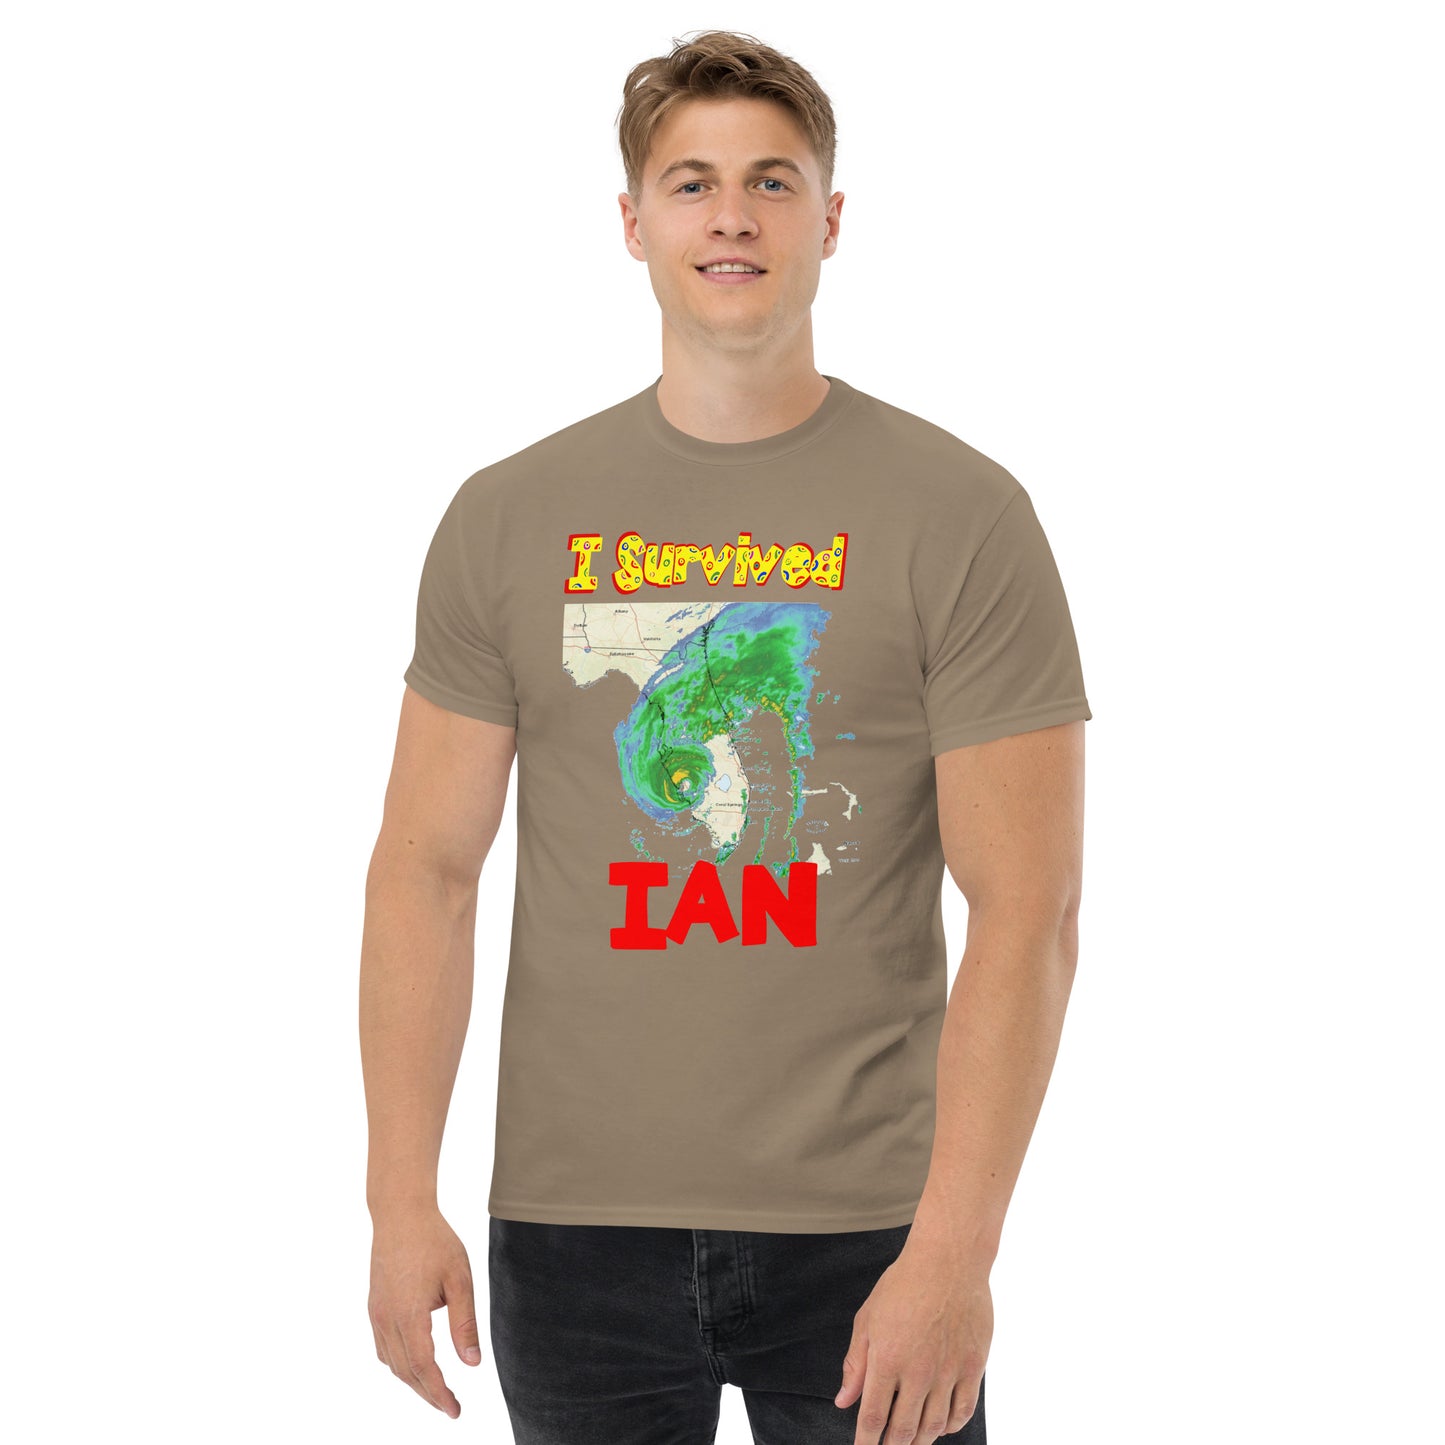 "I survived Hurricane Ian" with Hurricane Styled TextMen's classic tee